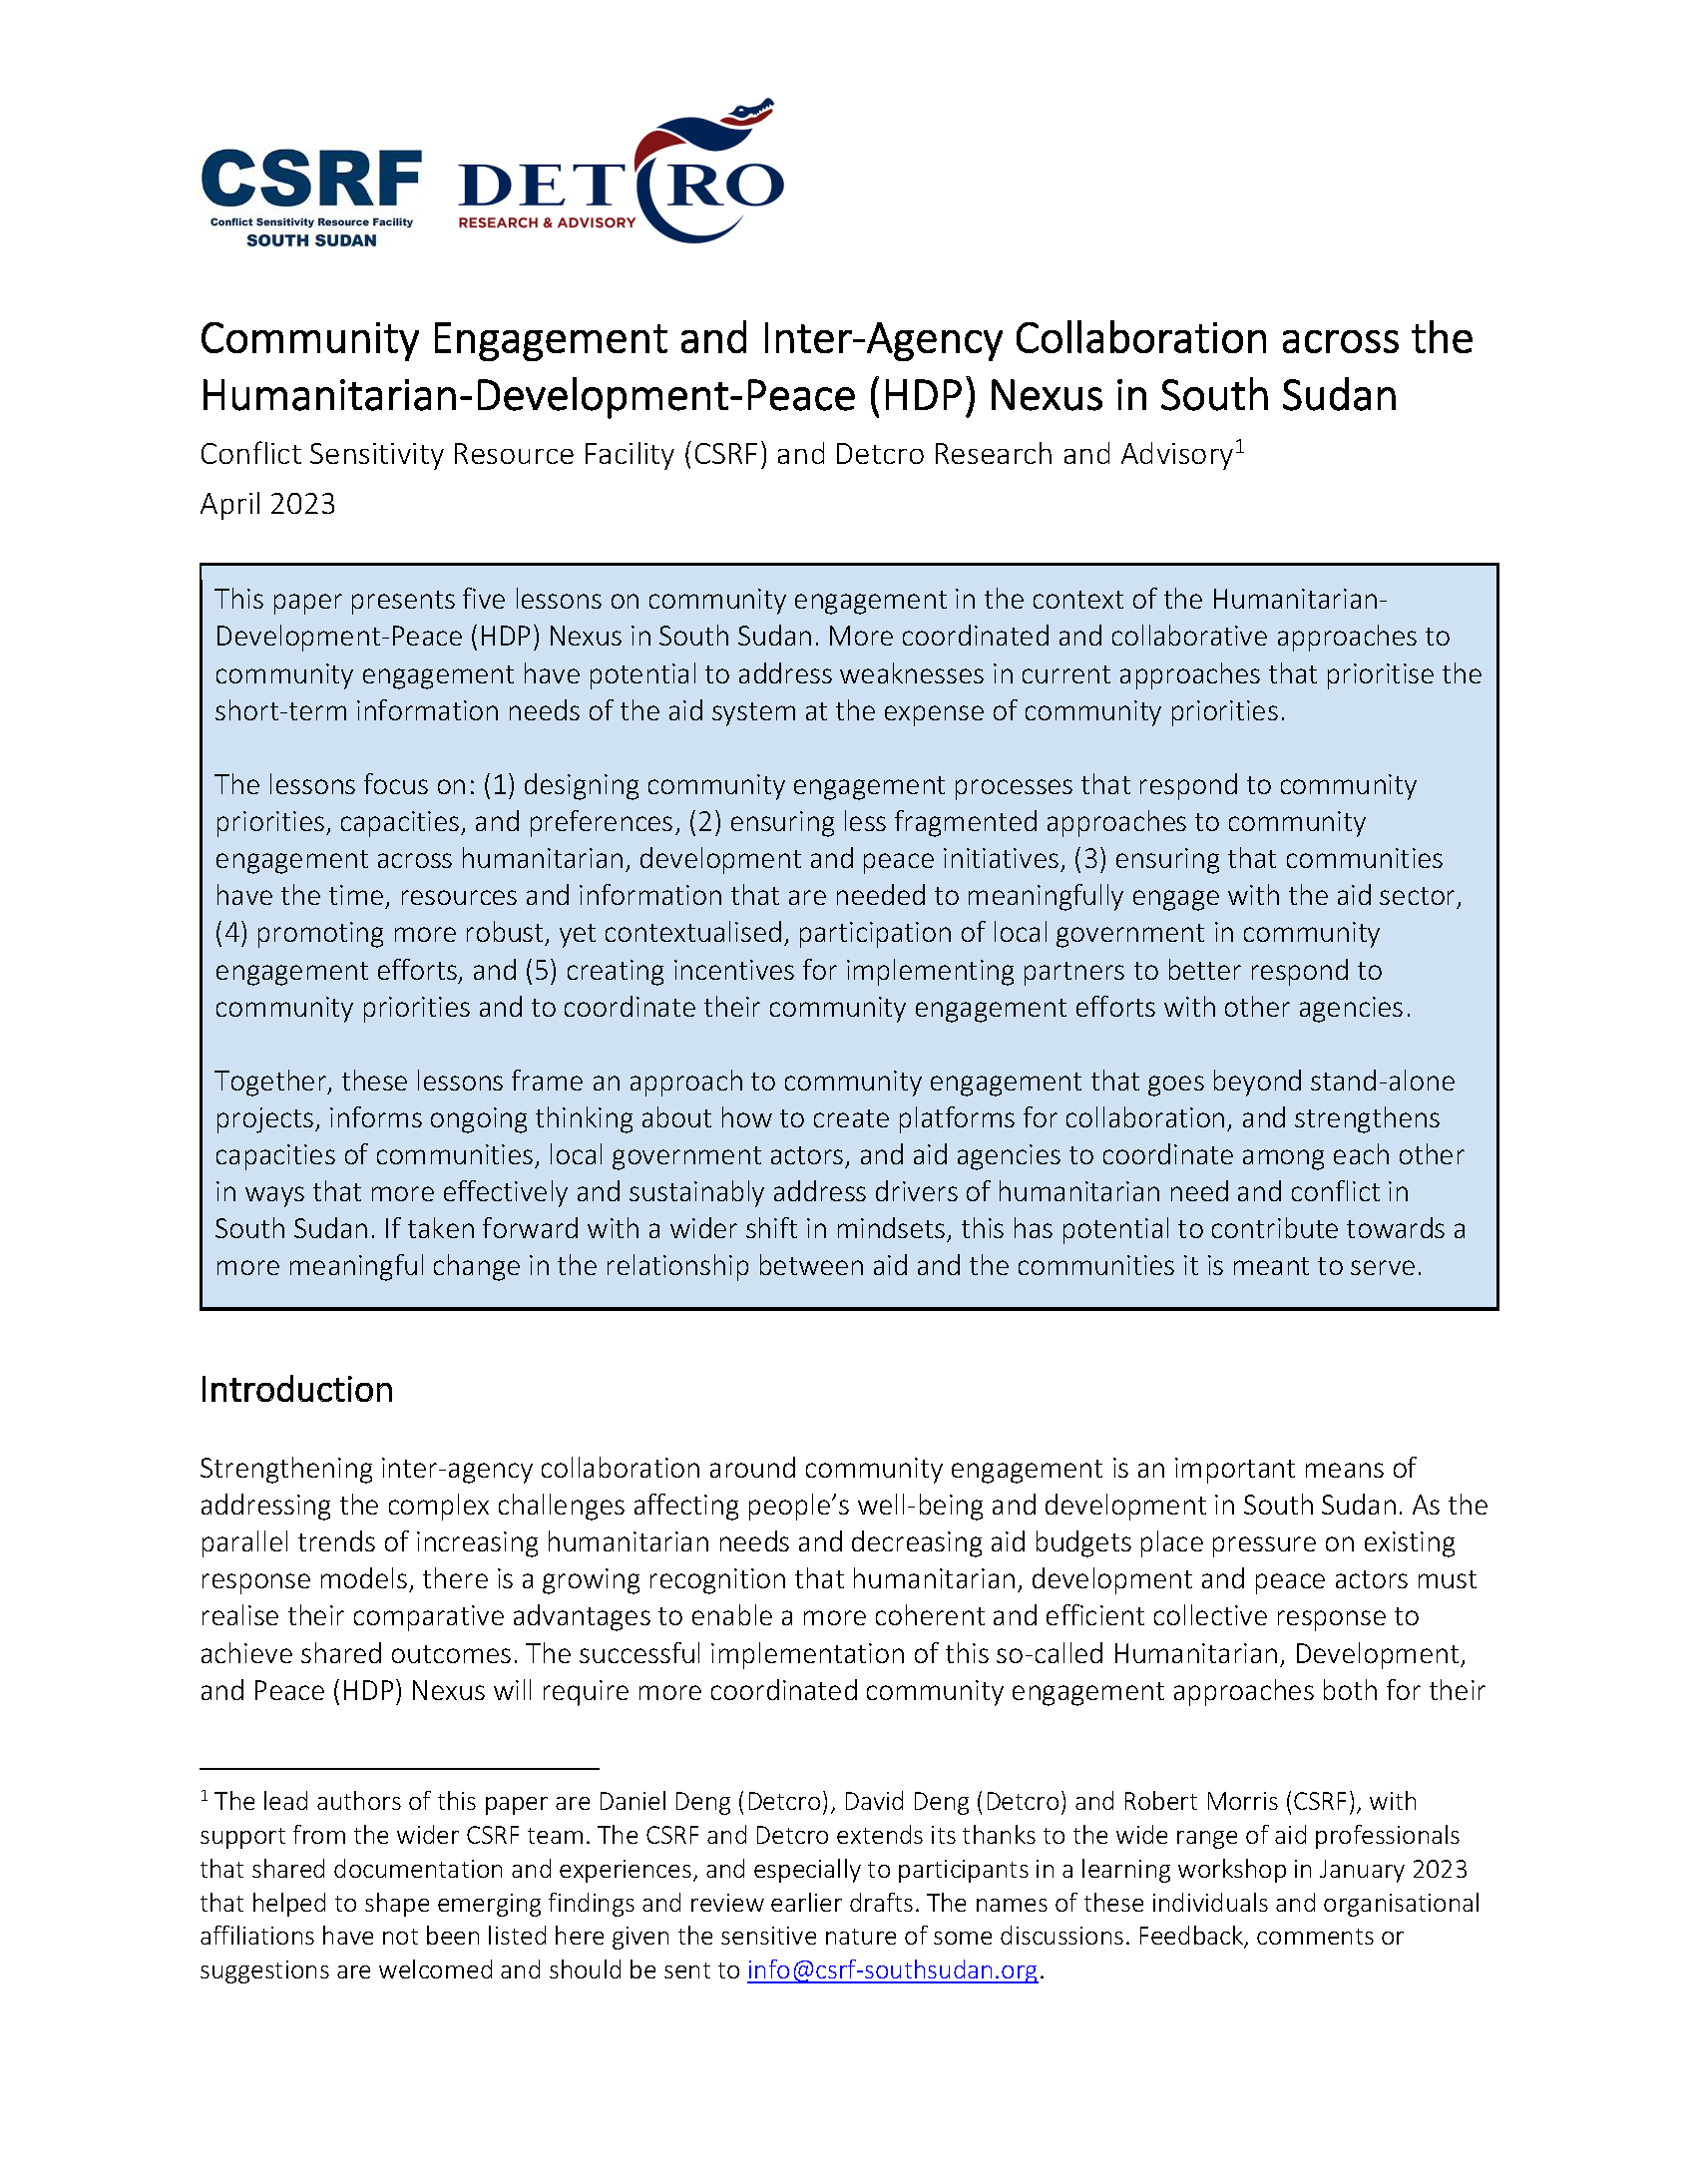 Cover page for Community Engagement and Inter-Agency Collaboration across the Humanitarian-Development-Peace Nexus in South Sudan